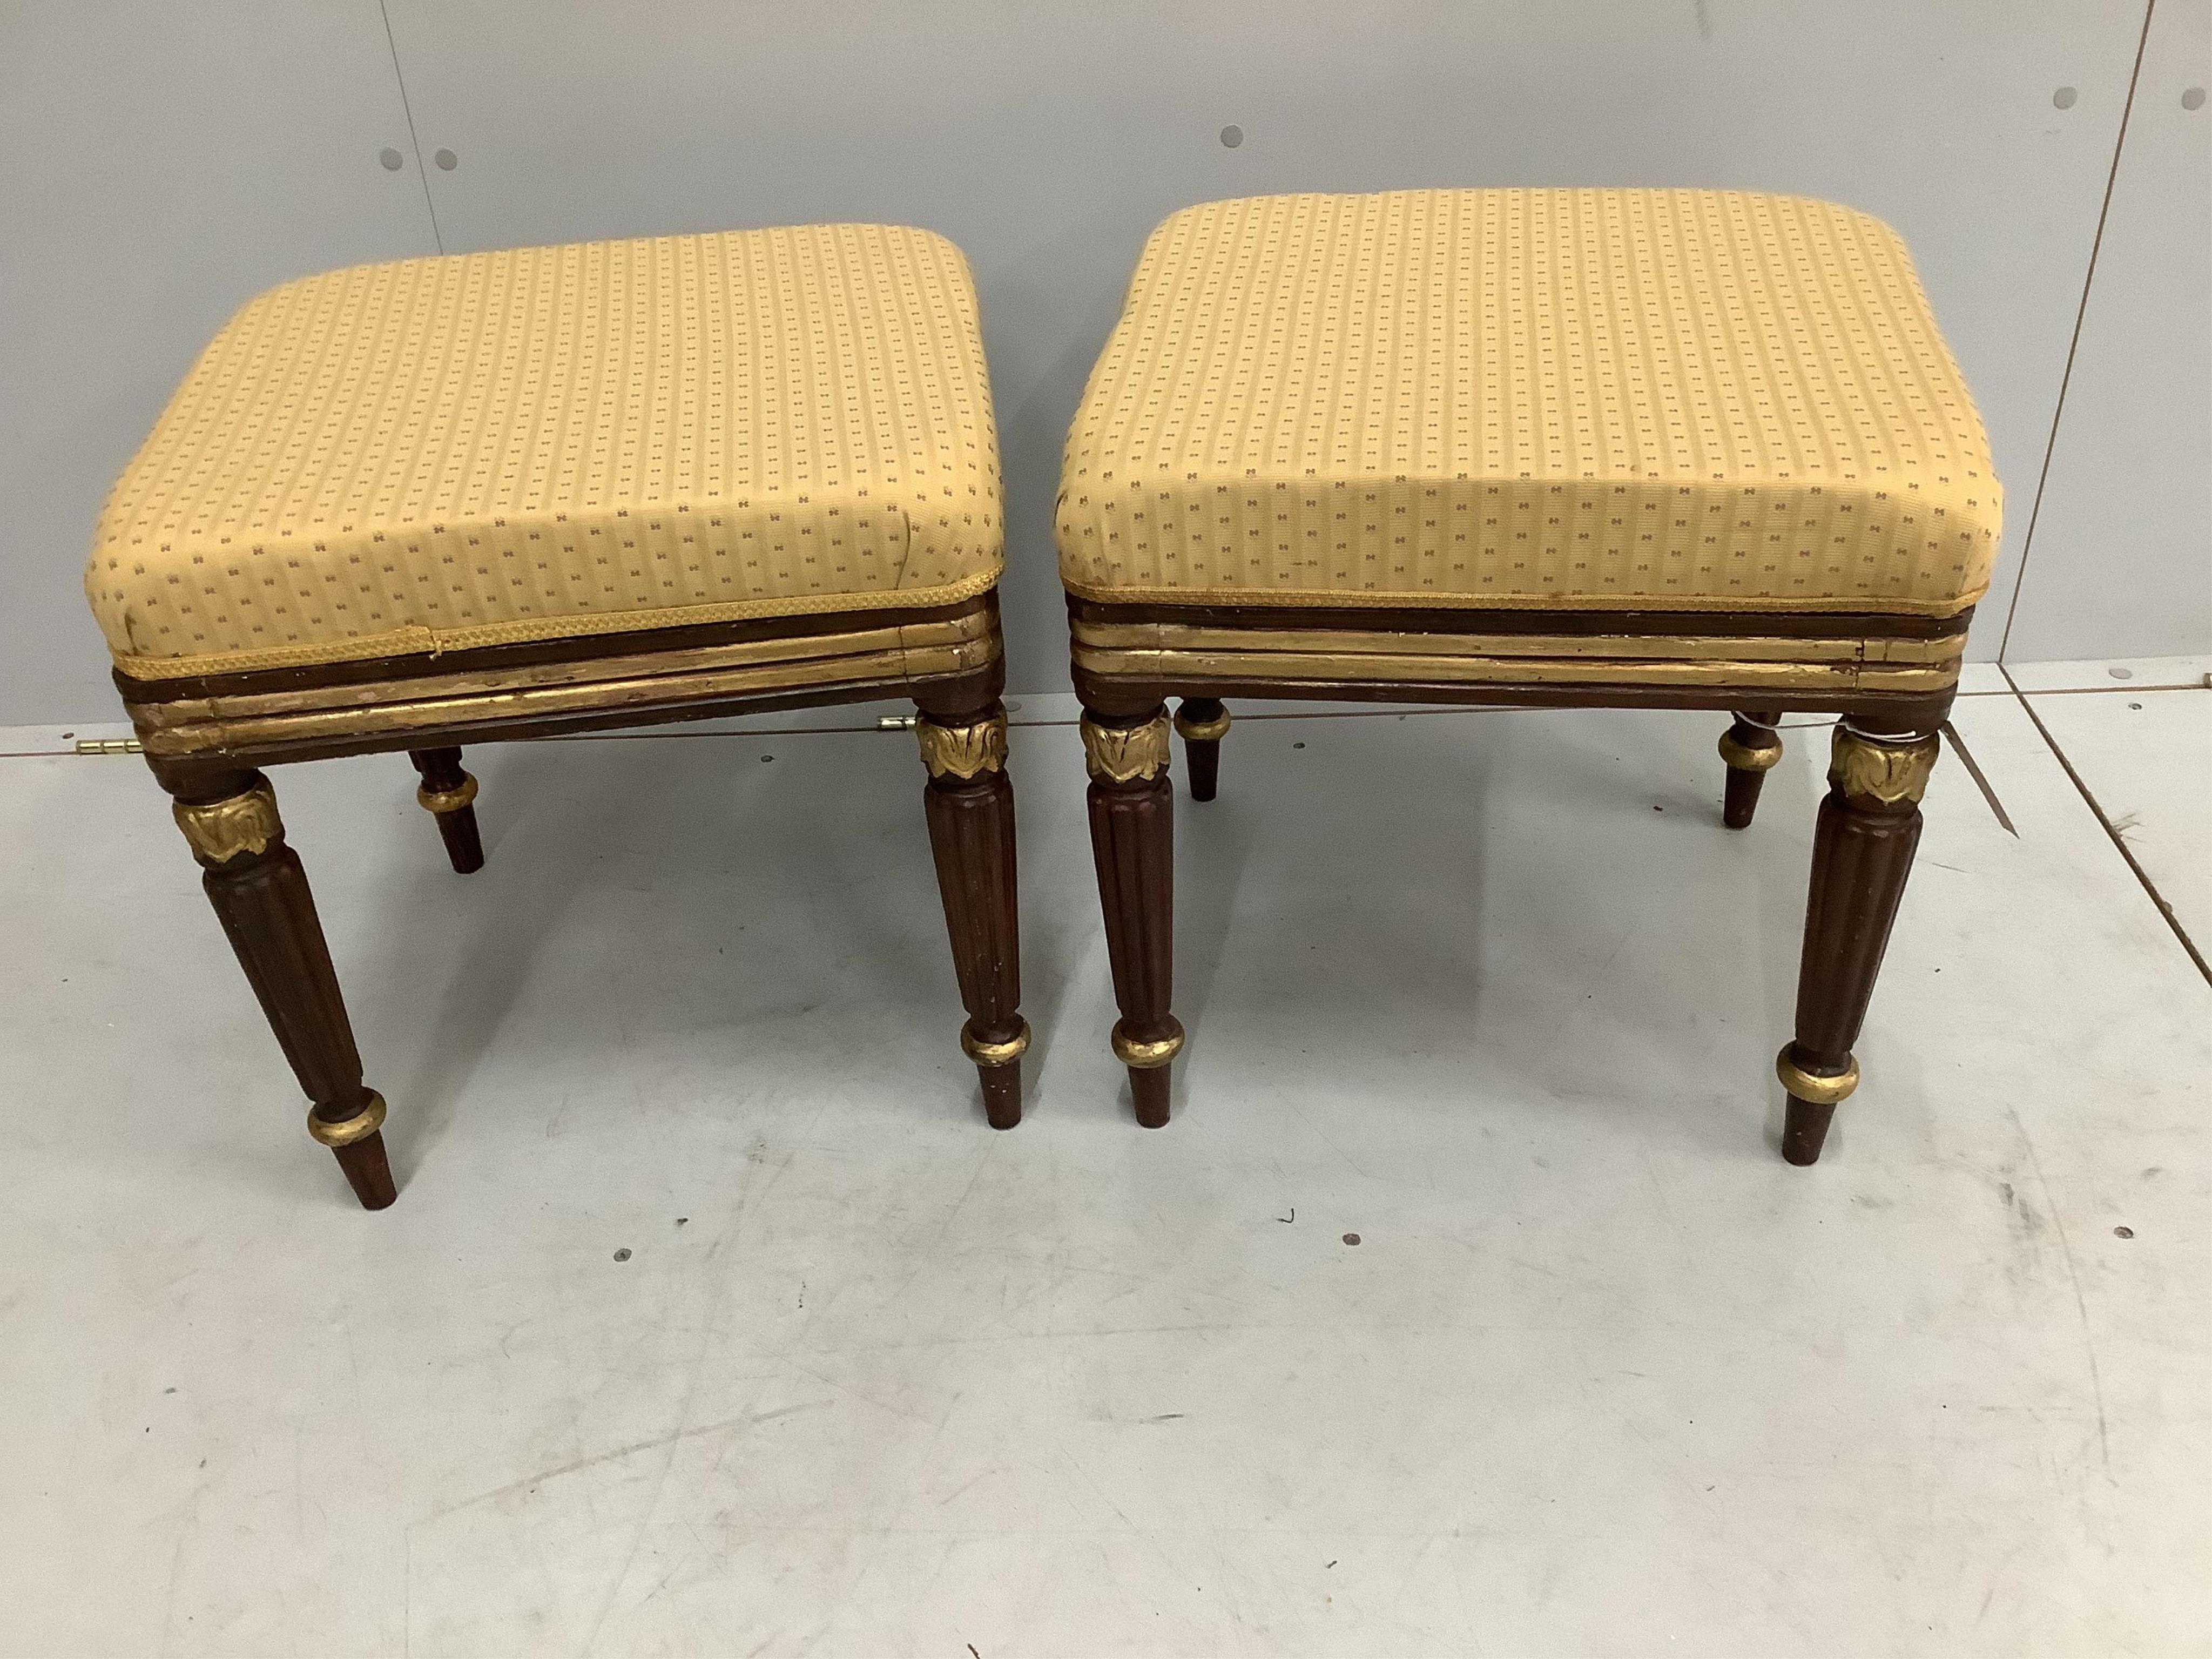 A pair of Regency style parcel gilt mahogany stools on reeded legs, width 45cm, height 46cm